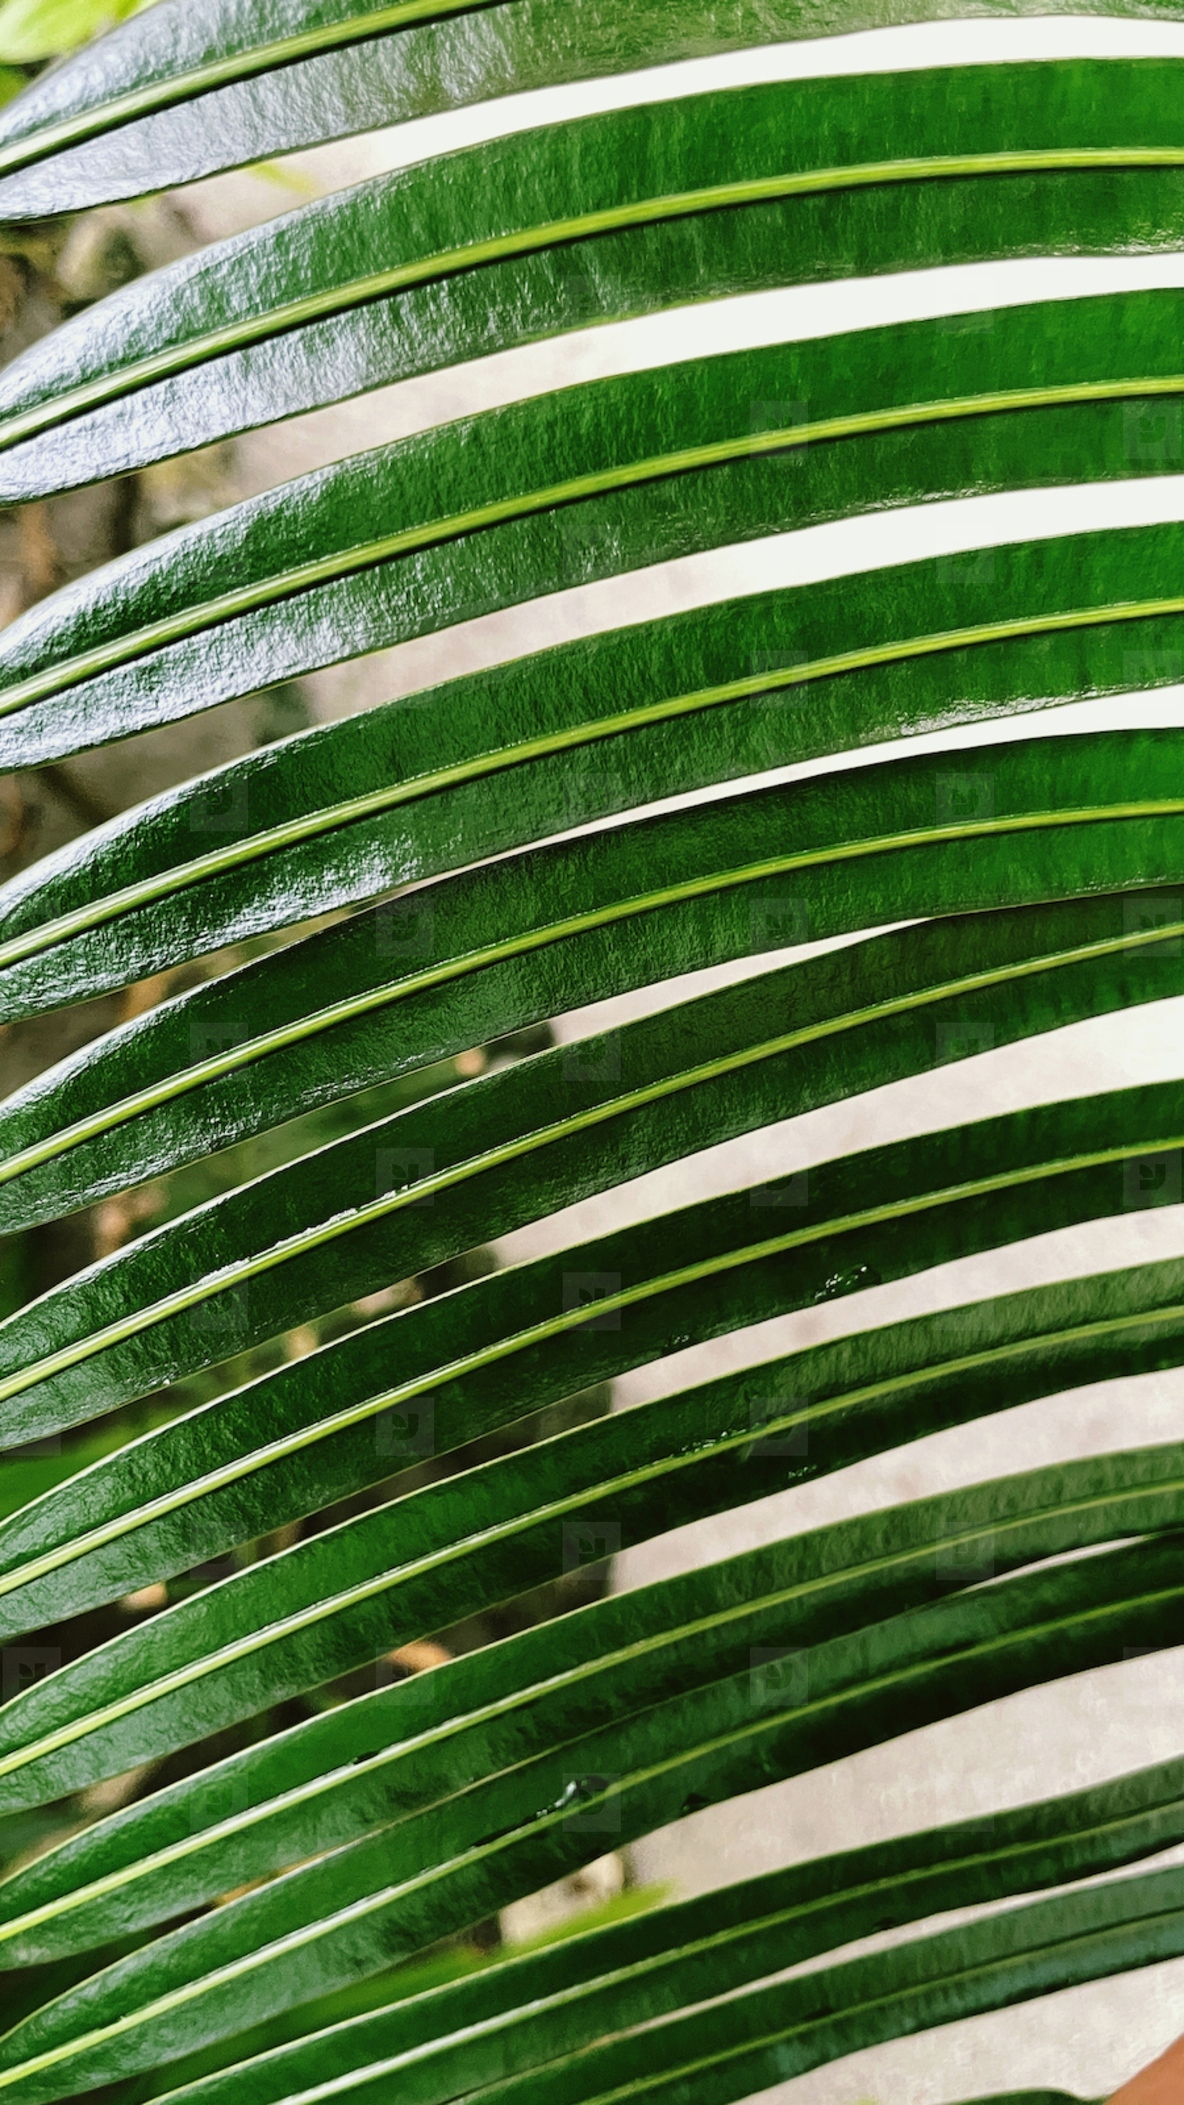 Part of a palm branch with many leaves